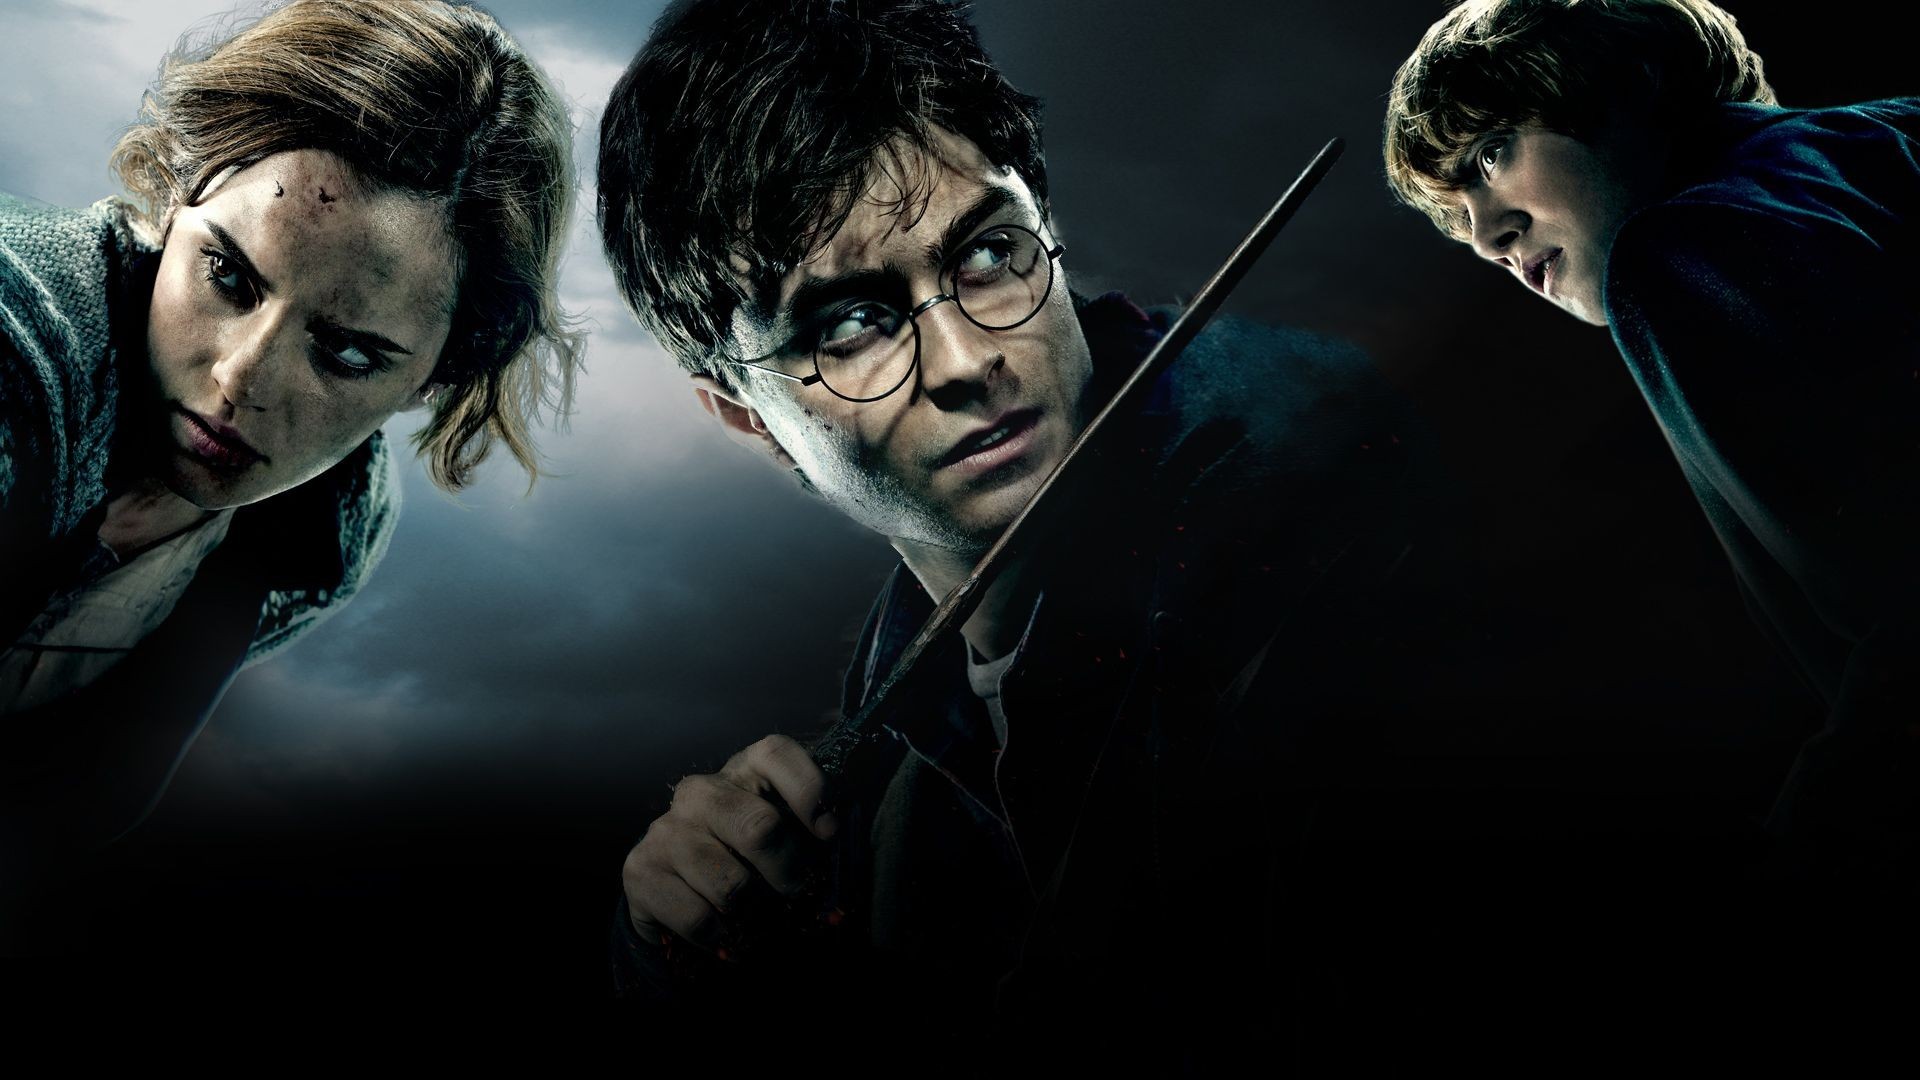 harry potter and the deathly hallows: part 1, emma watson, movie, daniel radcliffe, harry potter, hermione granger, ron weasley, rupert grint Free Stock Photo